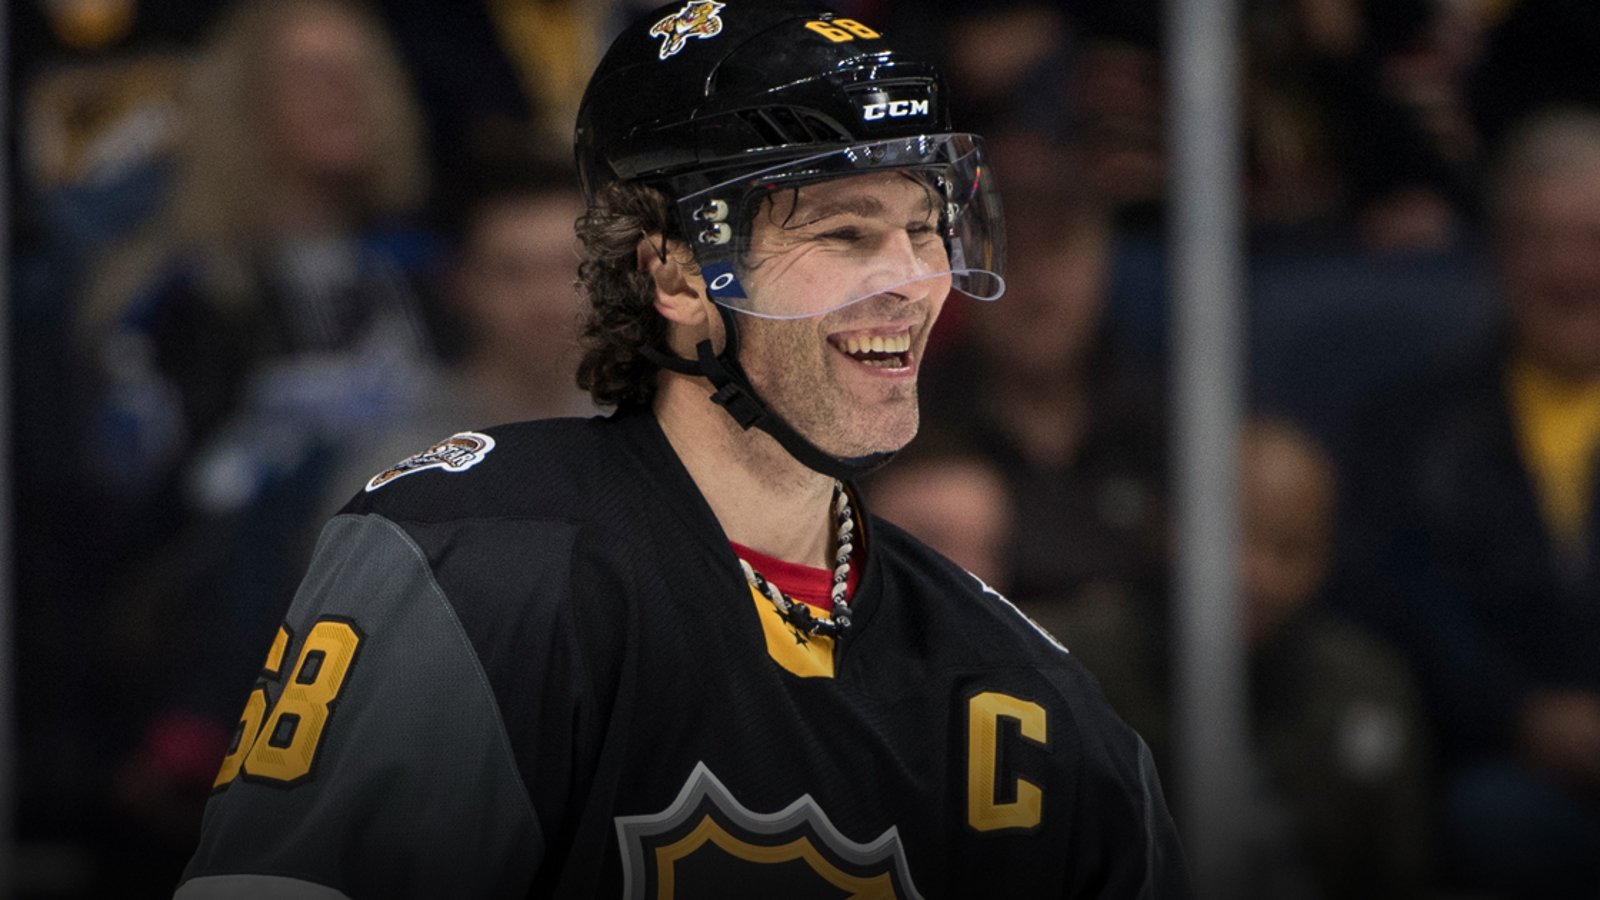 Did Jagr just reveal his allegiance for another Canadian team?